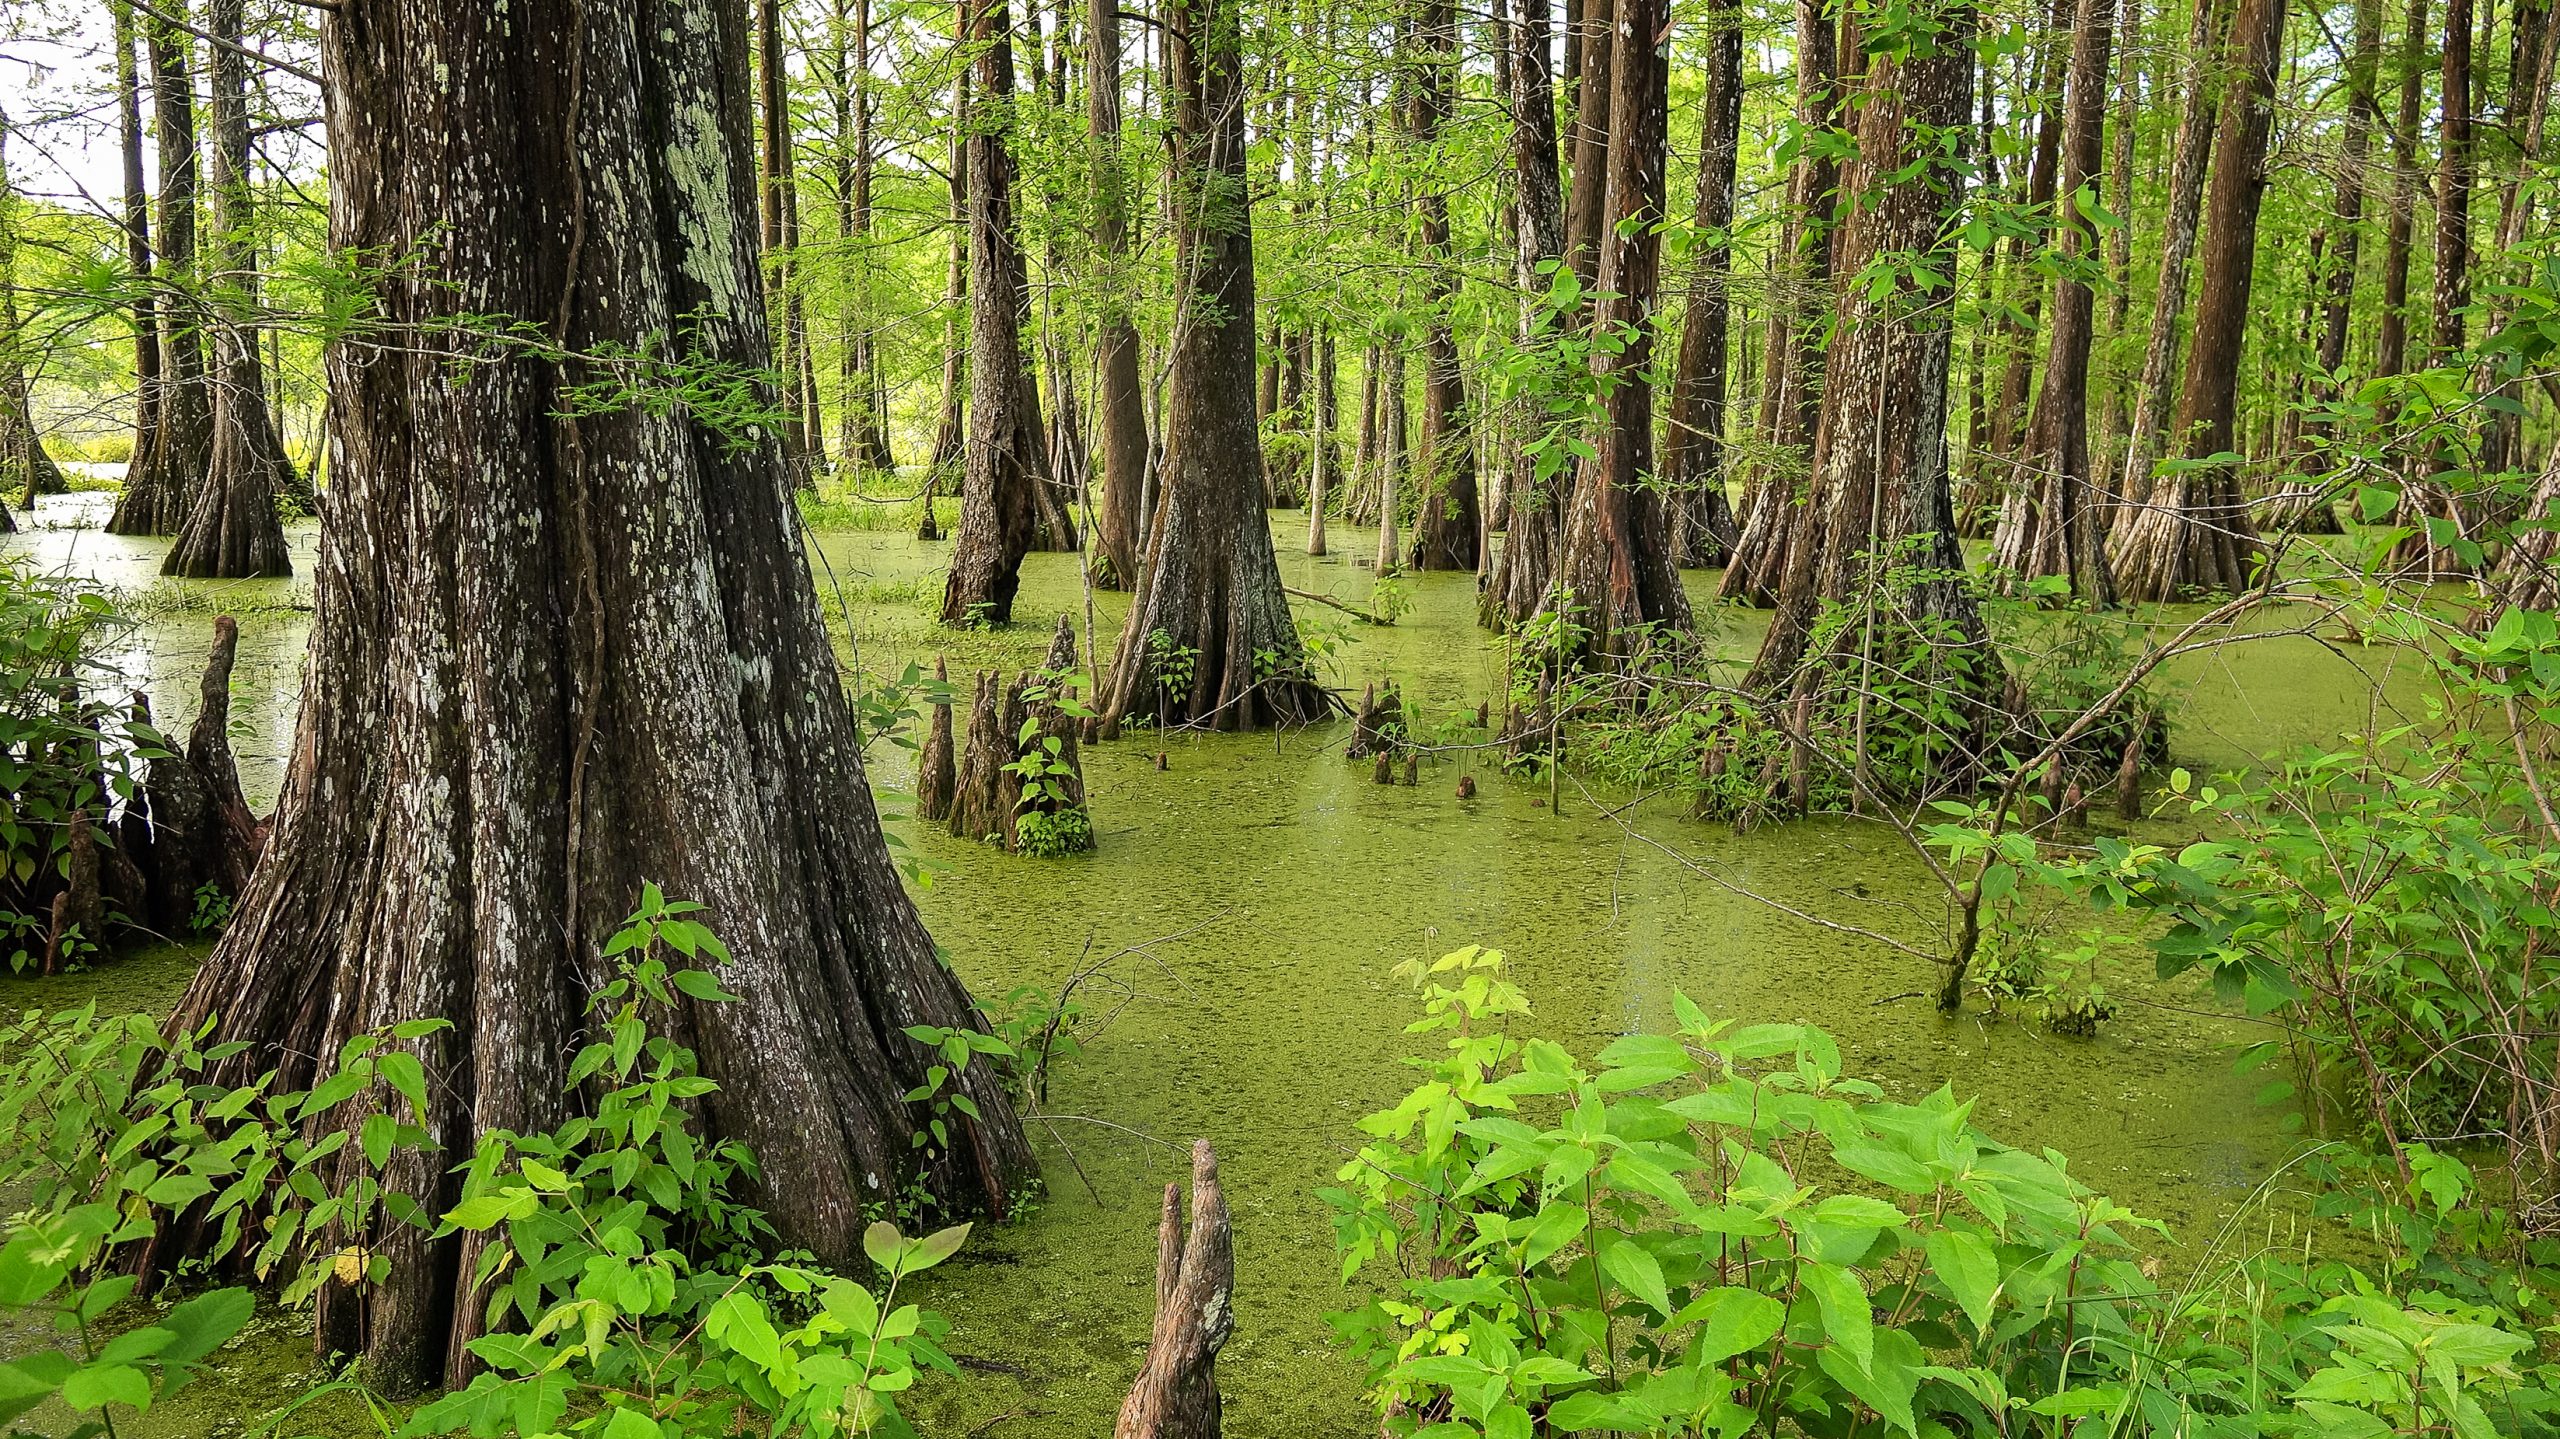 swamp forests are common in eastern North Carolina